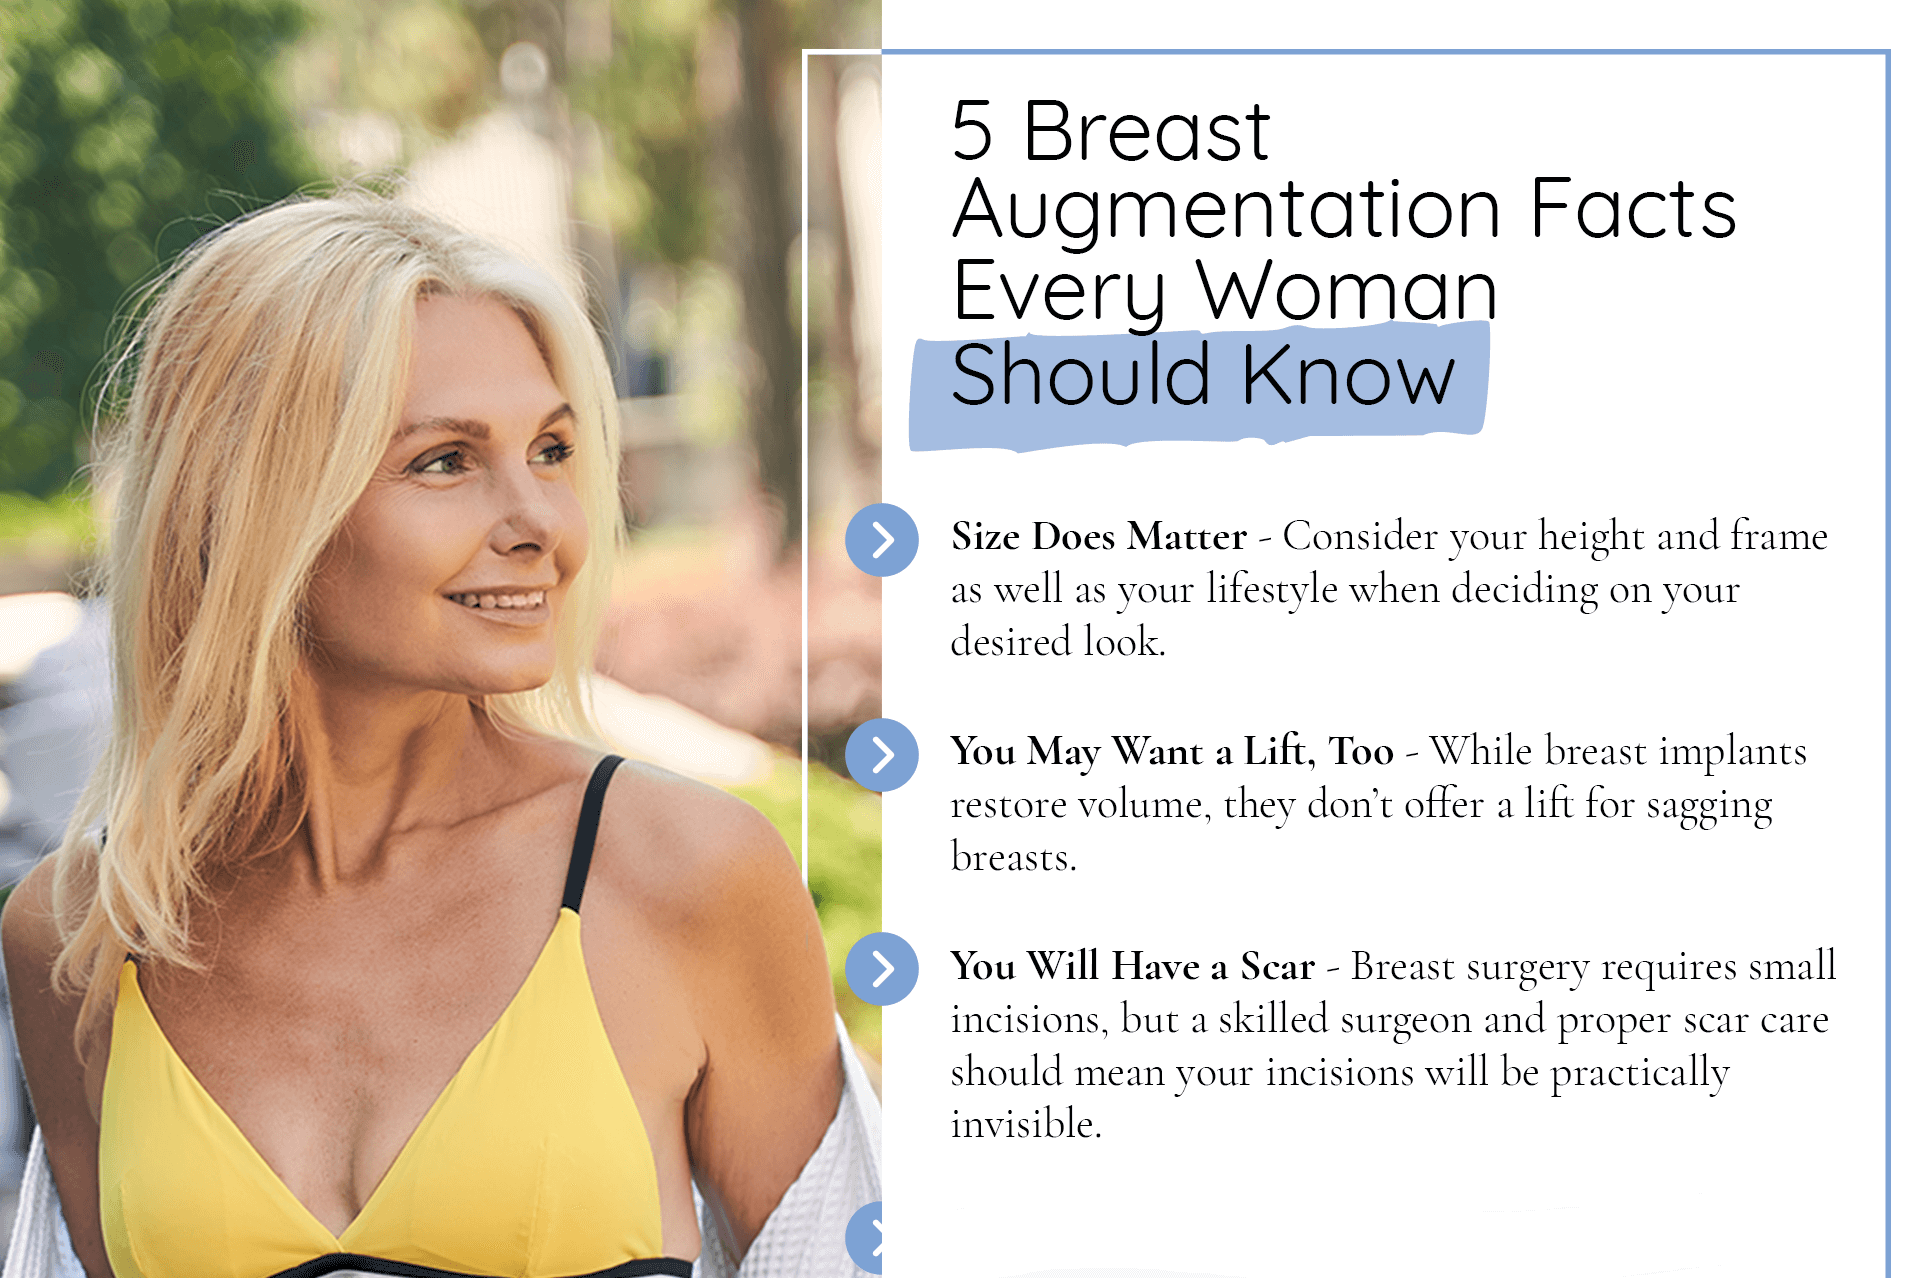 5 Breast Augmentation Facts Every Women Should Know